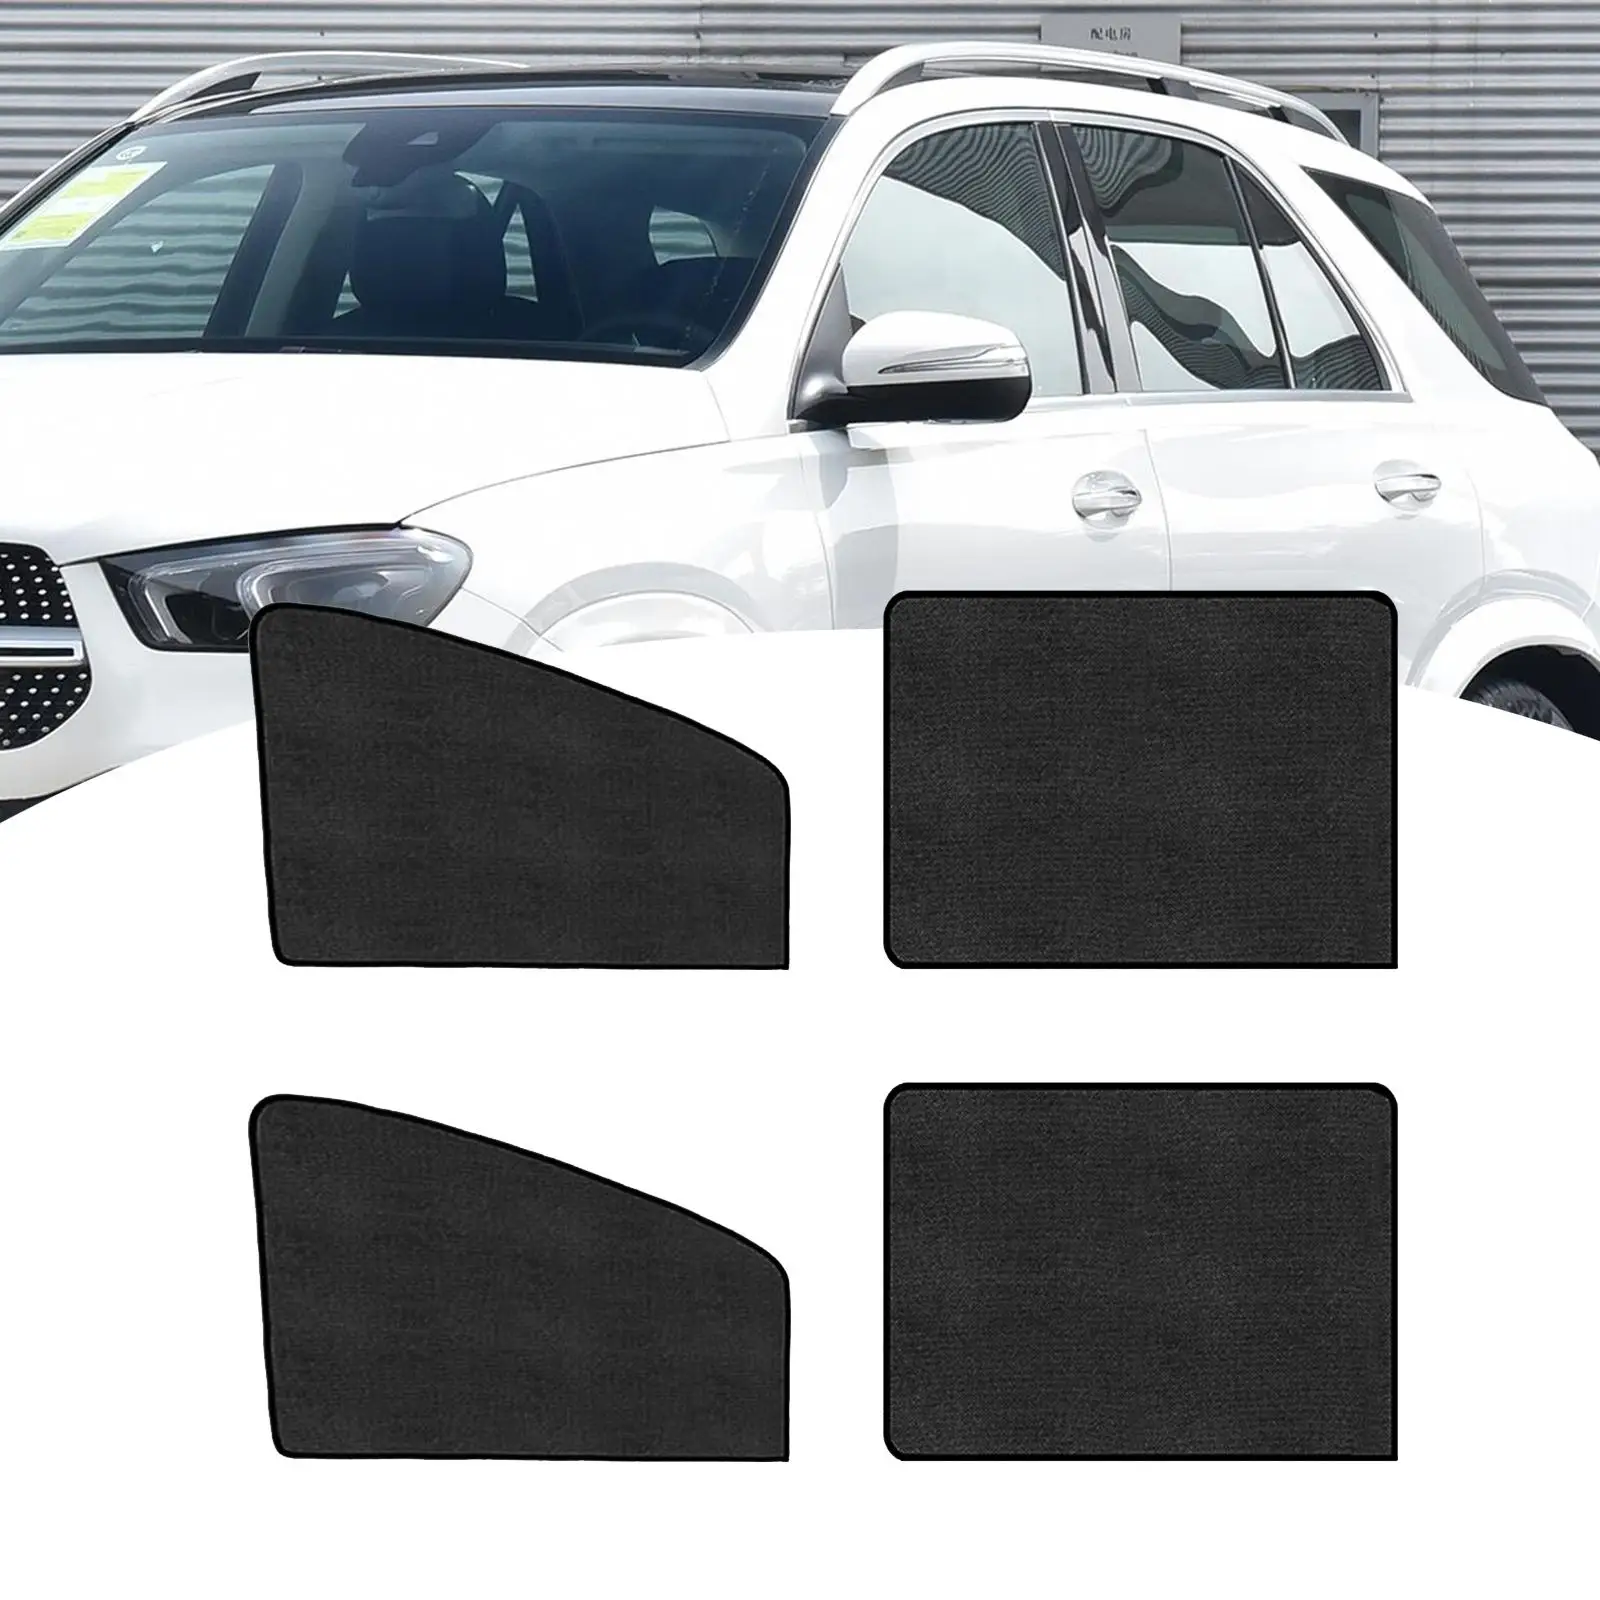 Car Window Sunshade Cover Magnetic Protection Summer Accessories Auto Curtain Automotive Window Sun Visor Window Shade Cover